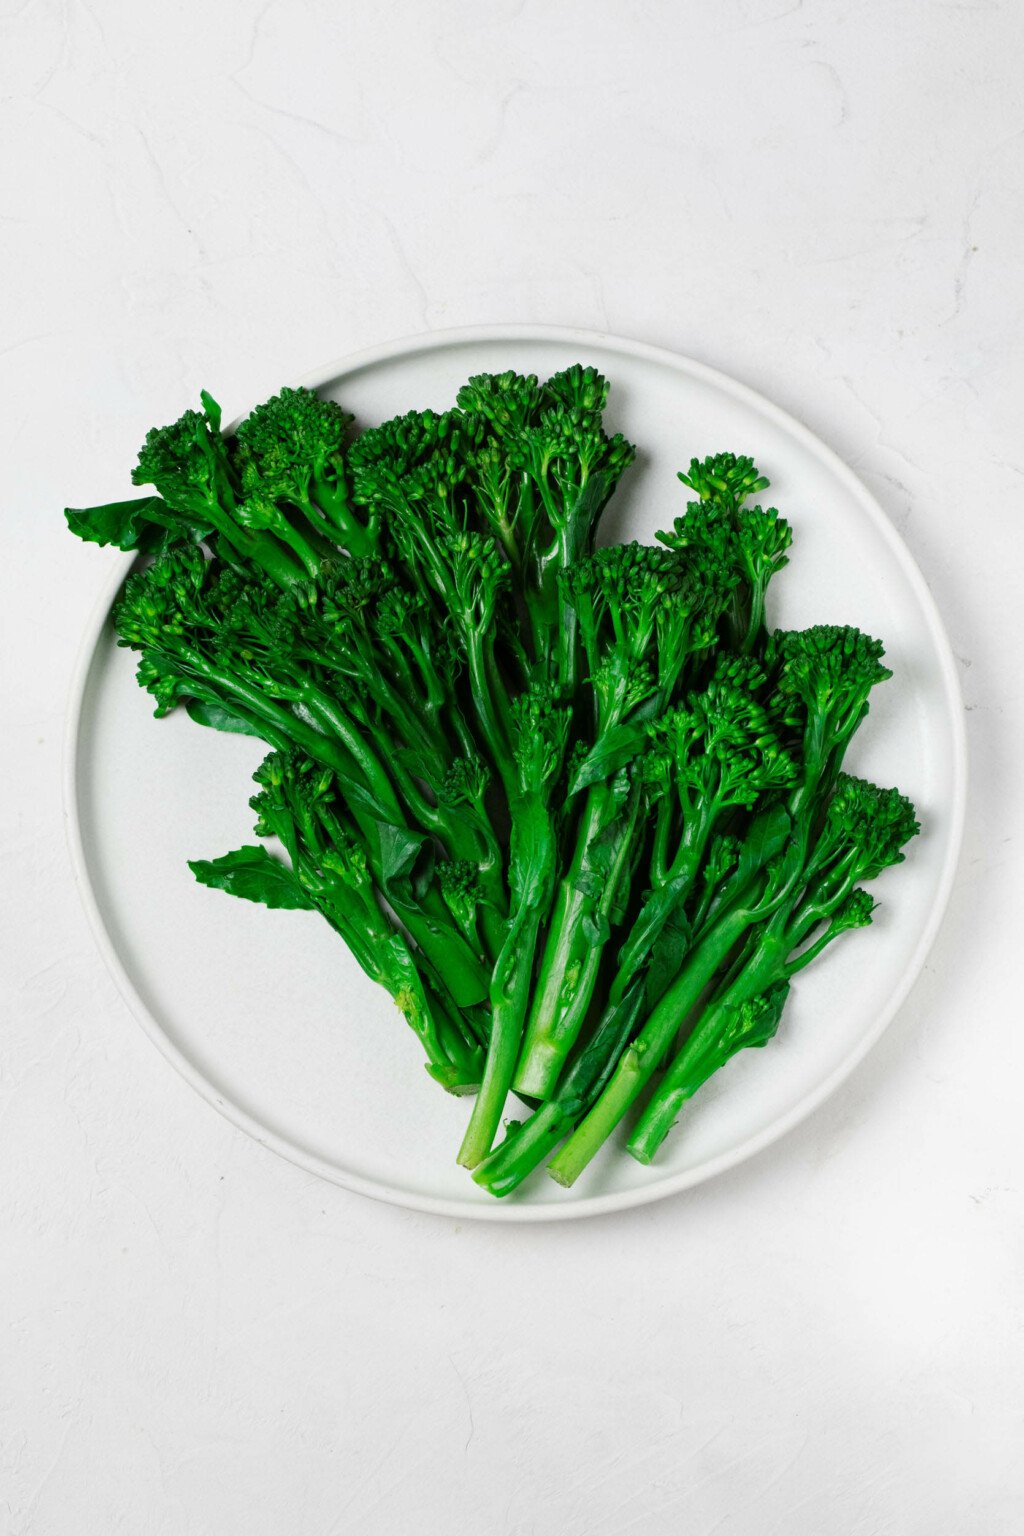 A round, white plate is resting on a bright, white surface. The plate holds bright green, steamed baby broccoli.